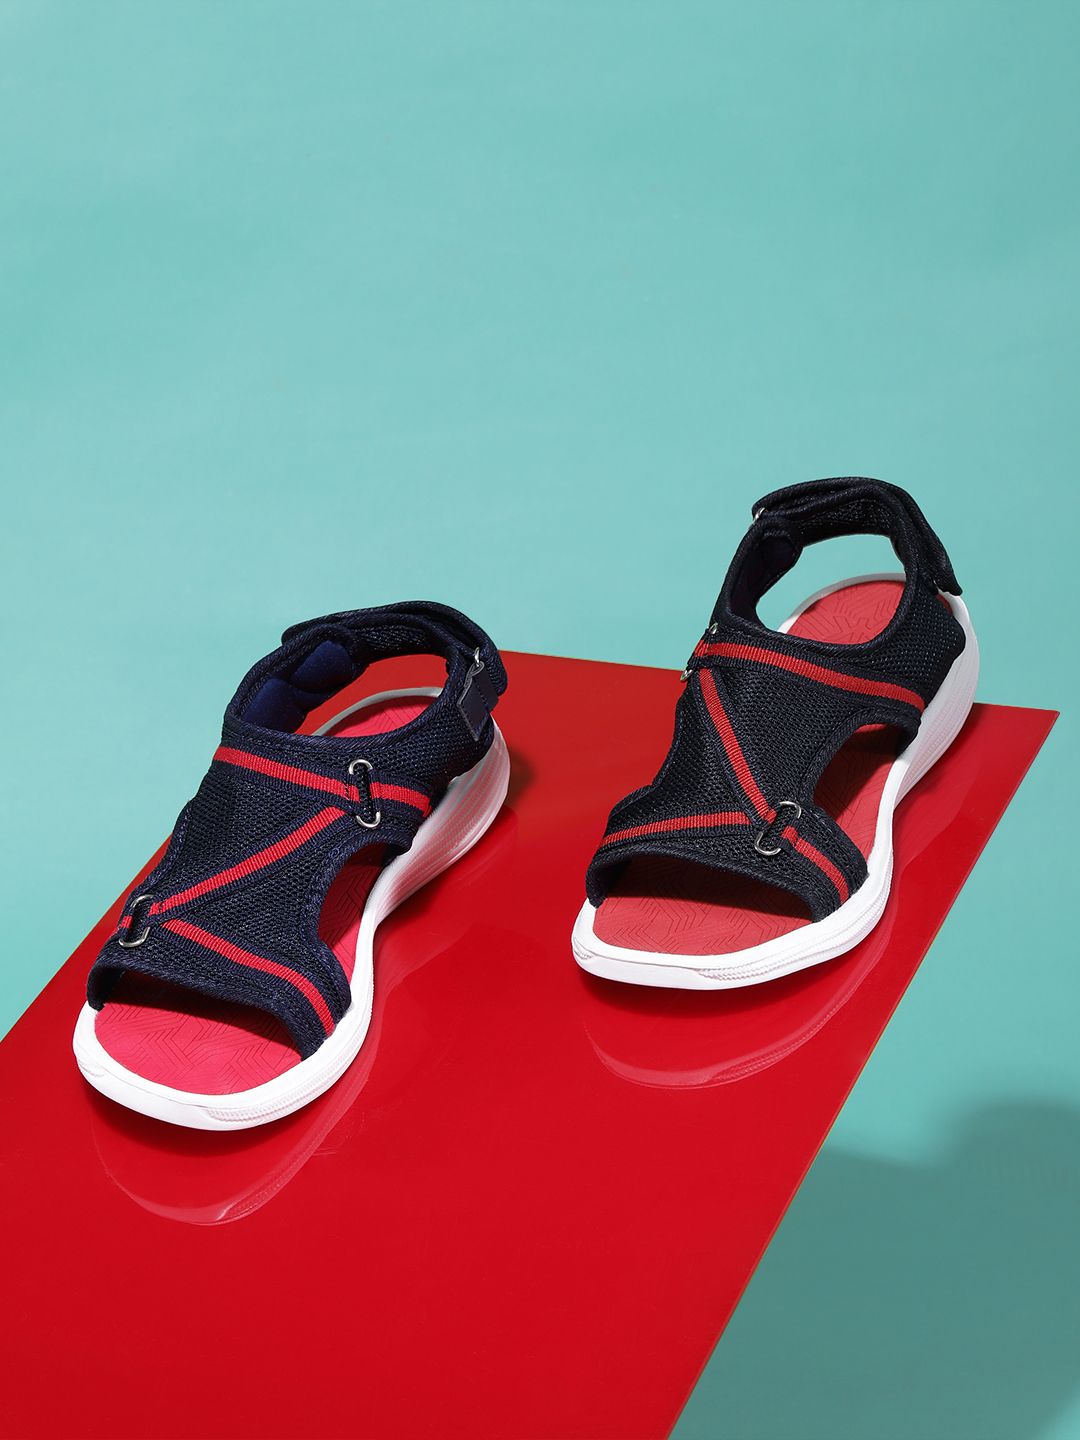 Kook N Keech Women Navy & Red Striped Sports Sandals Price in India